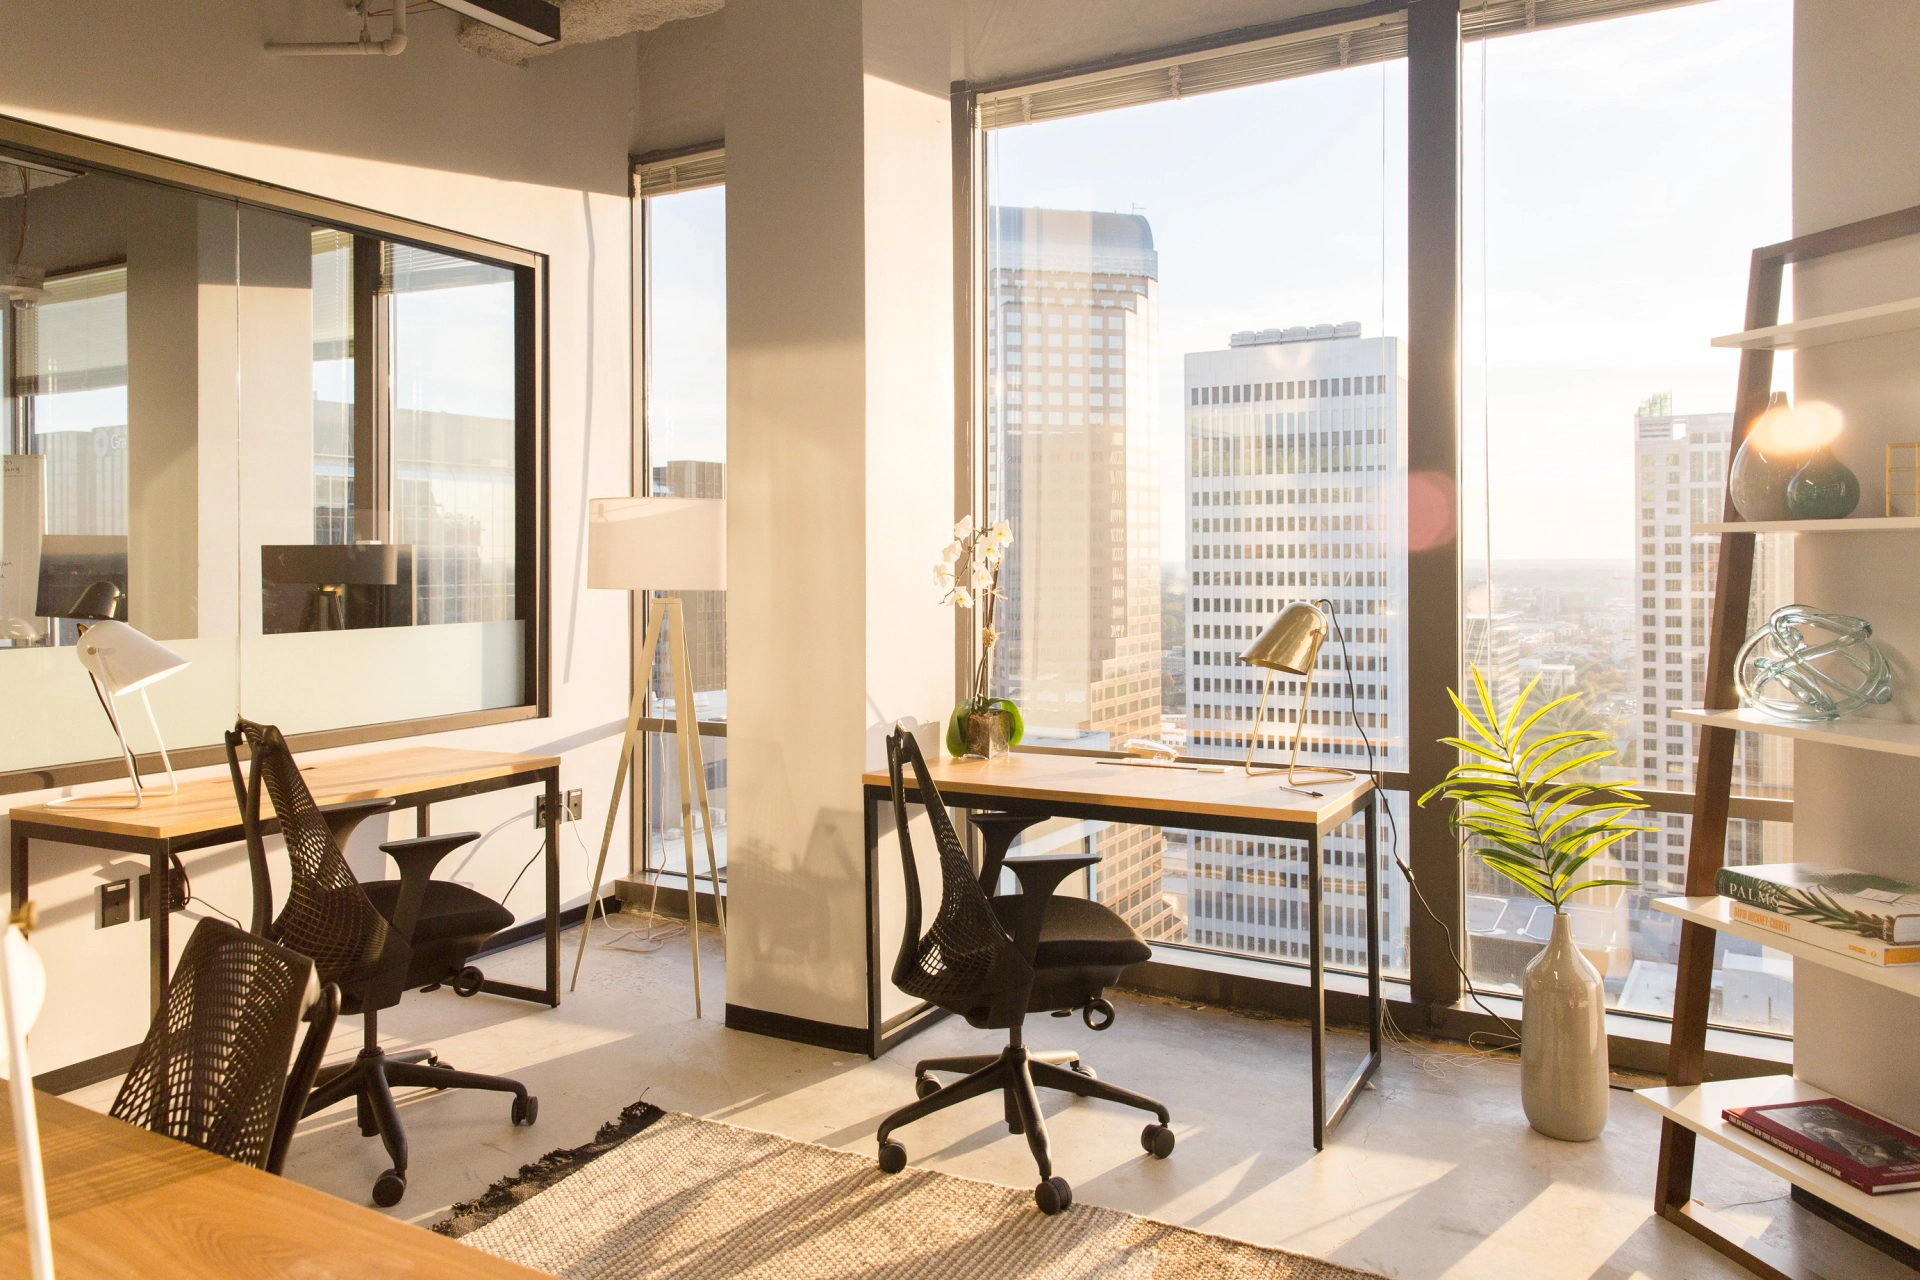 A coworking space with a desk offering a stunning city view.